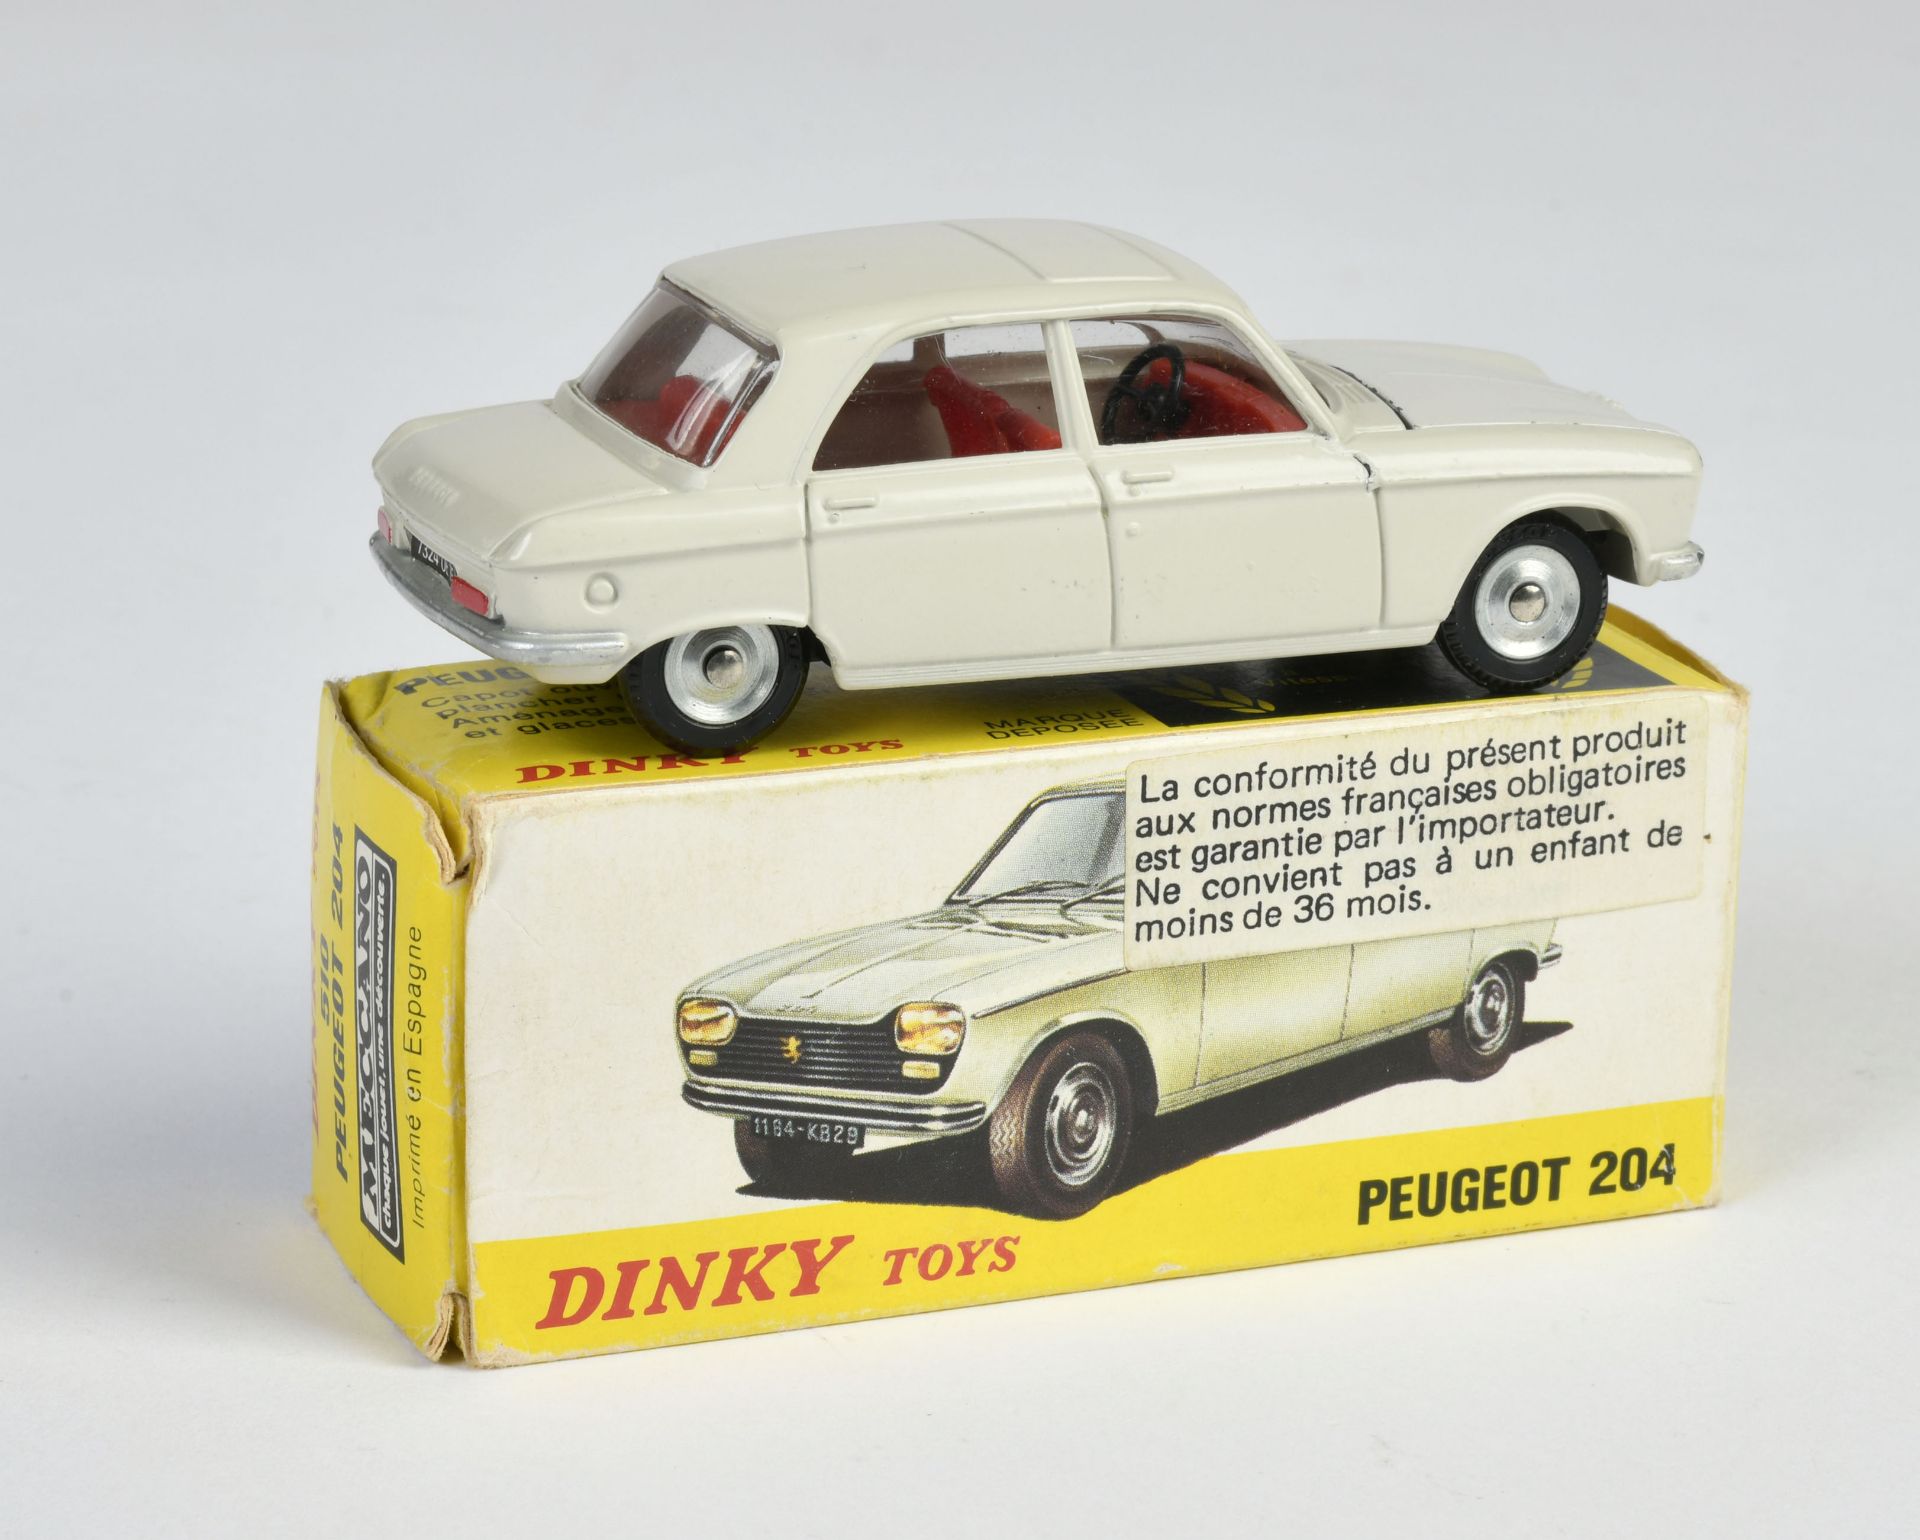 Dinky Toys, 510 Peugeot 204, grey, red Interior, England, 1:43, diecast, box C 2, C 1 - Image 2 of 2